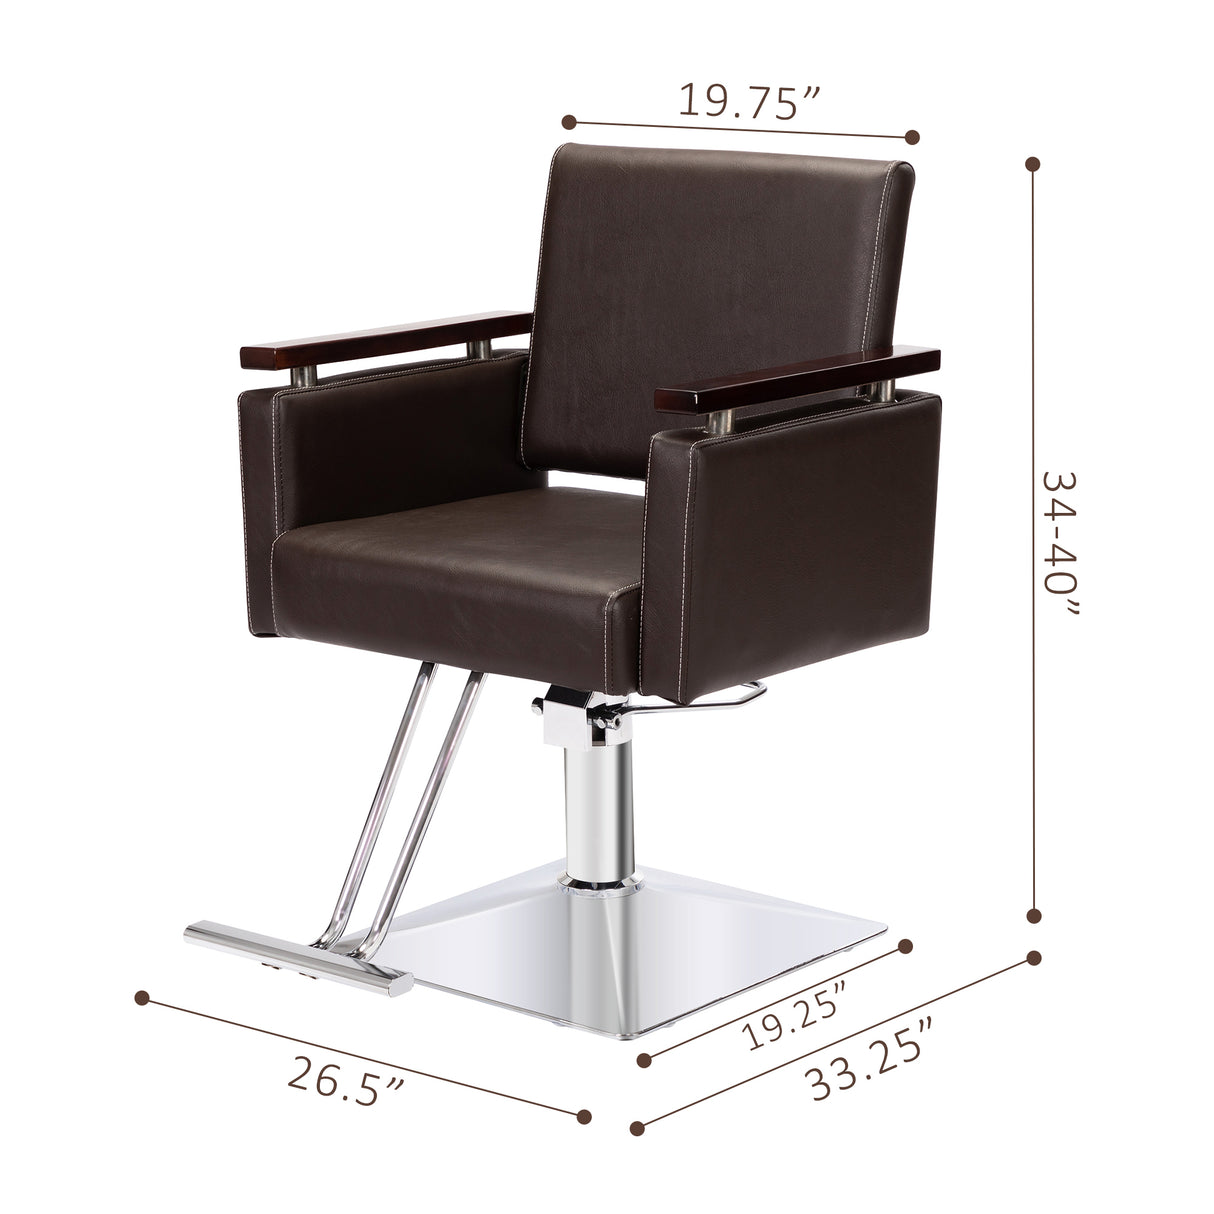 Hydraulic Barber Chair, Heavy-Duty Styling Chair with 360 Degree Rotation for Barber Shop, Beauty Salon, Spa, Tattoo Shop, Brown - Home Elegance USA